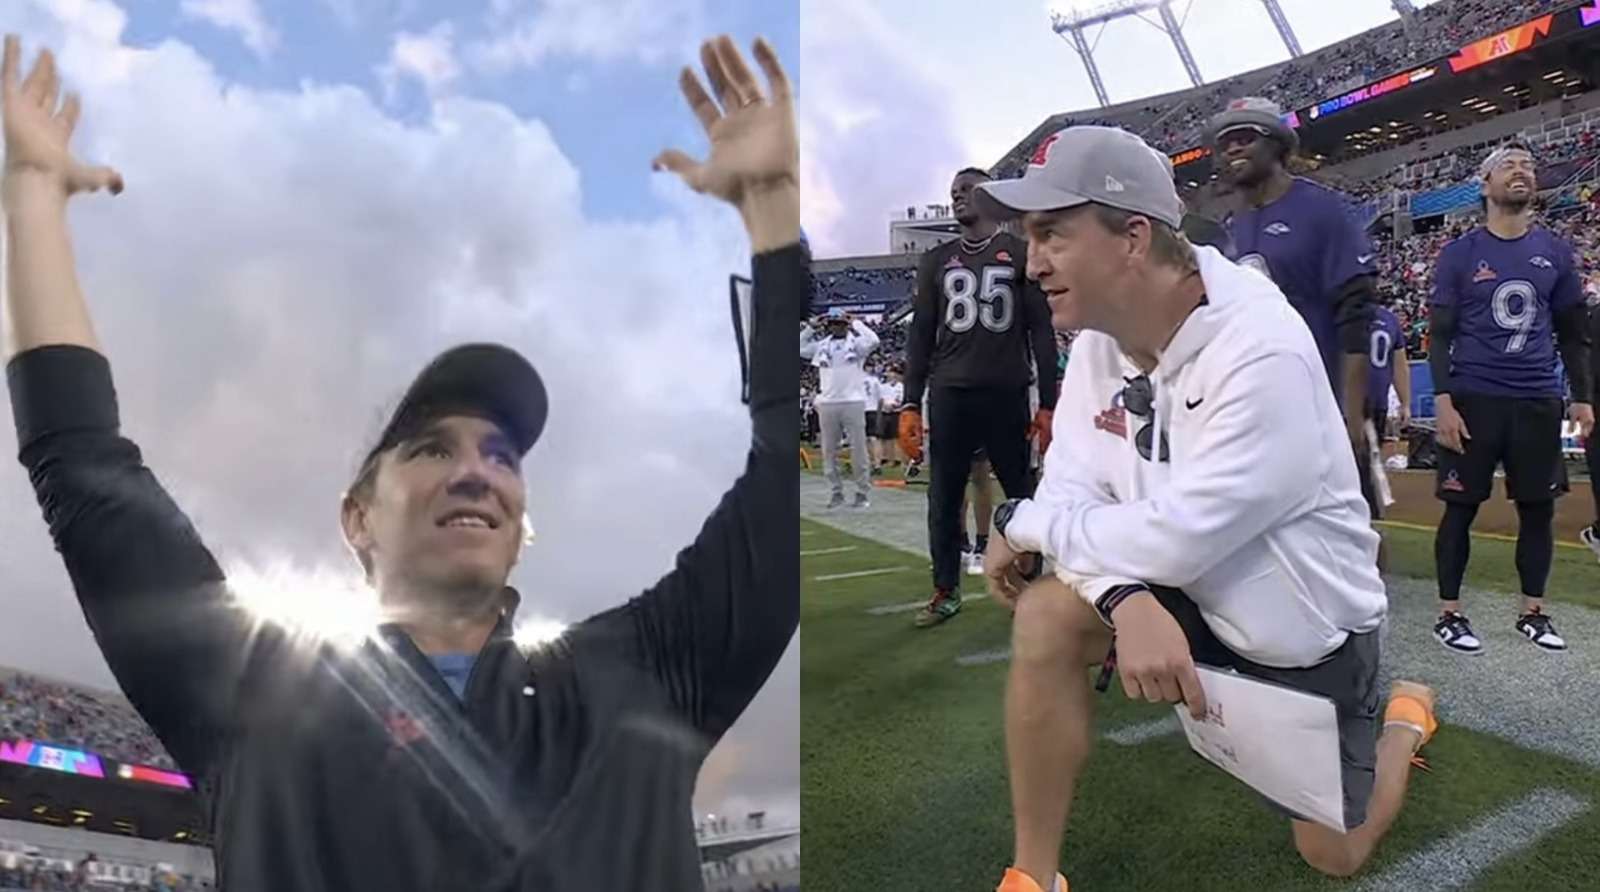 NFL Pro Bowl: Manning brothers engage in heated battle while Peyton’s son says the game was rigged